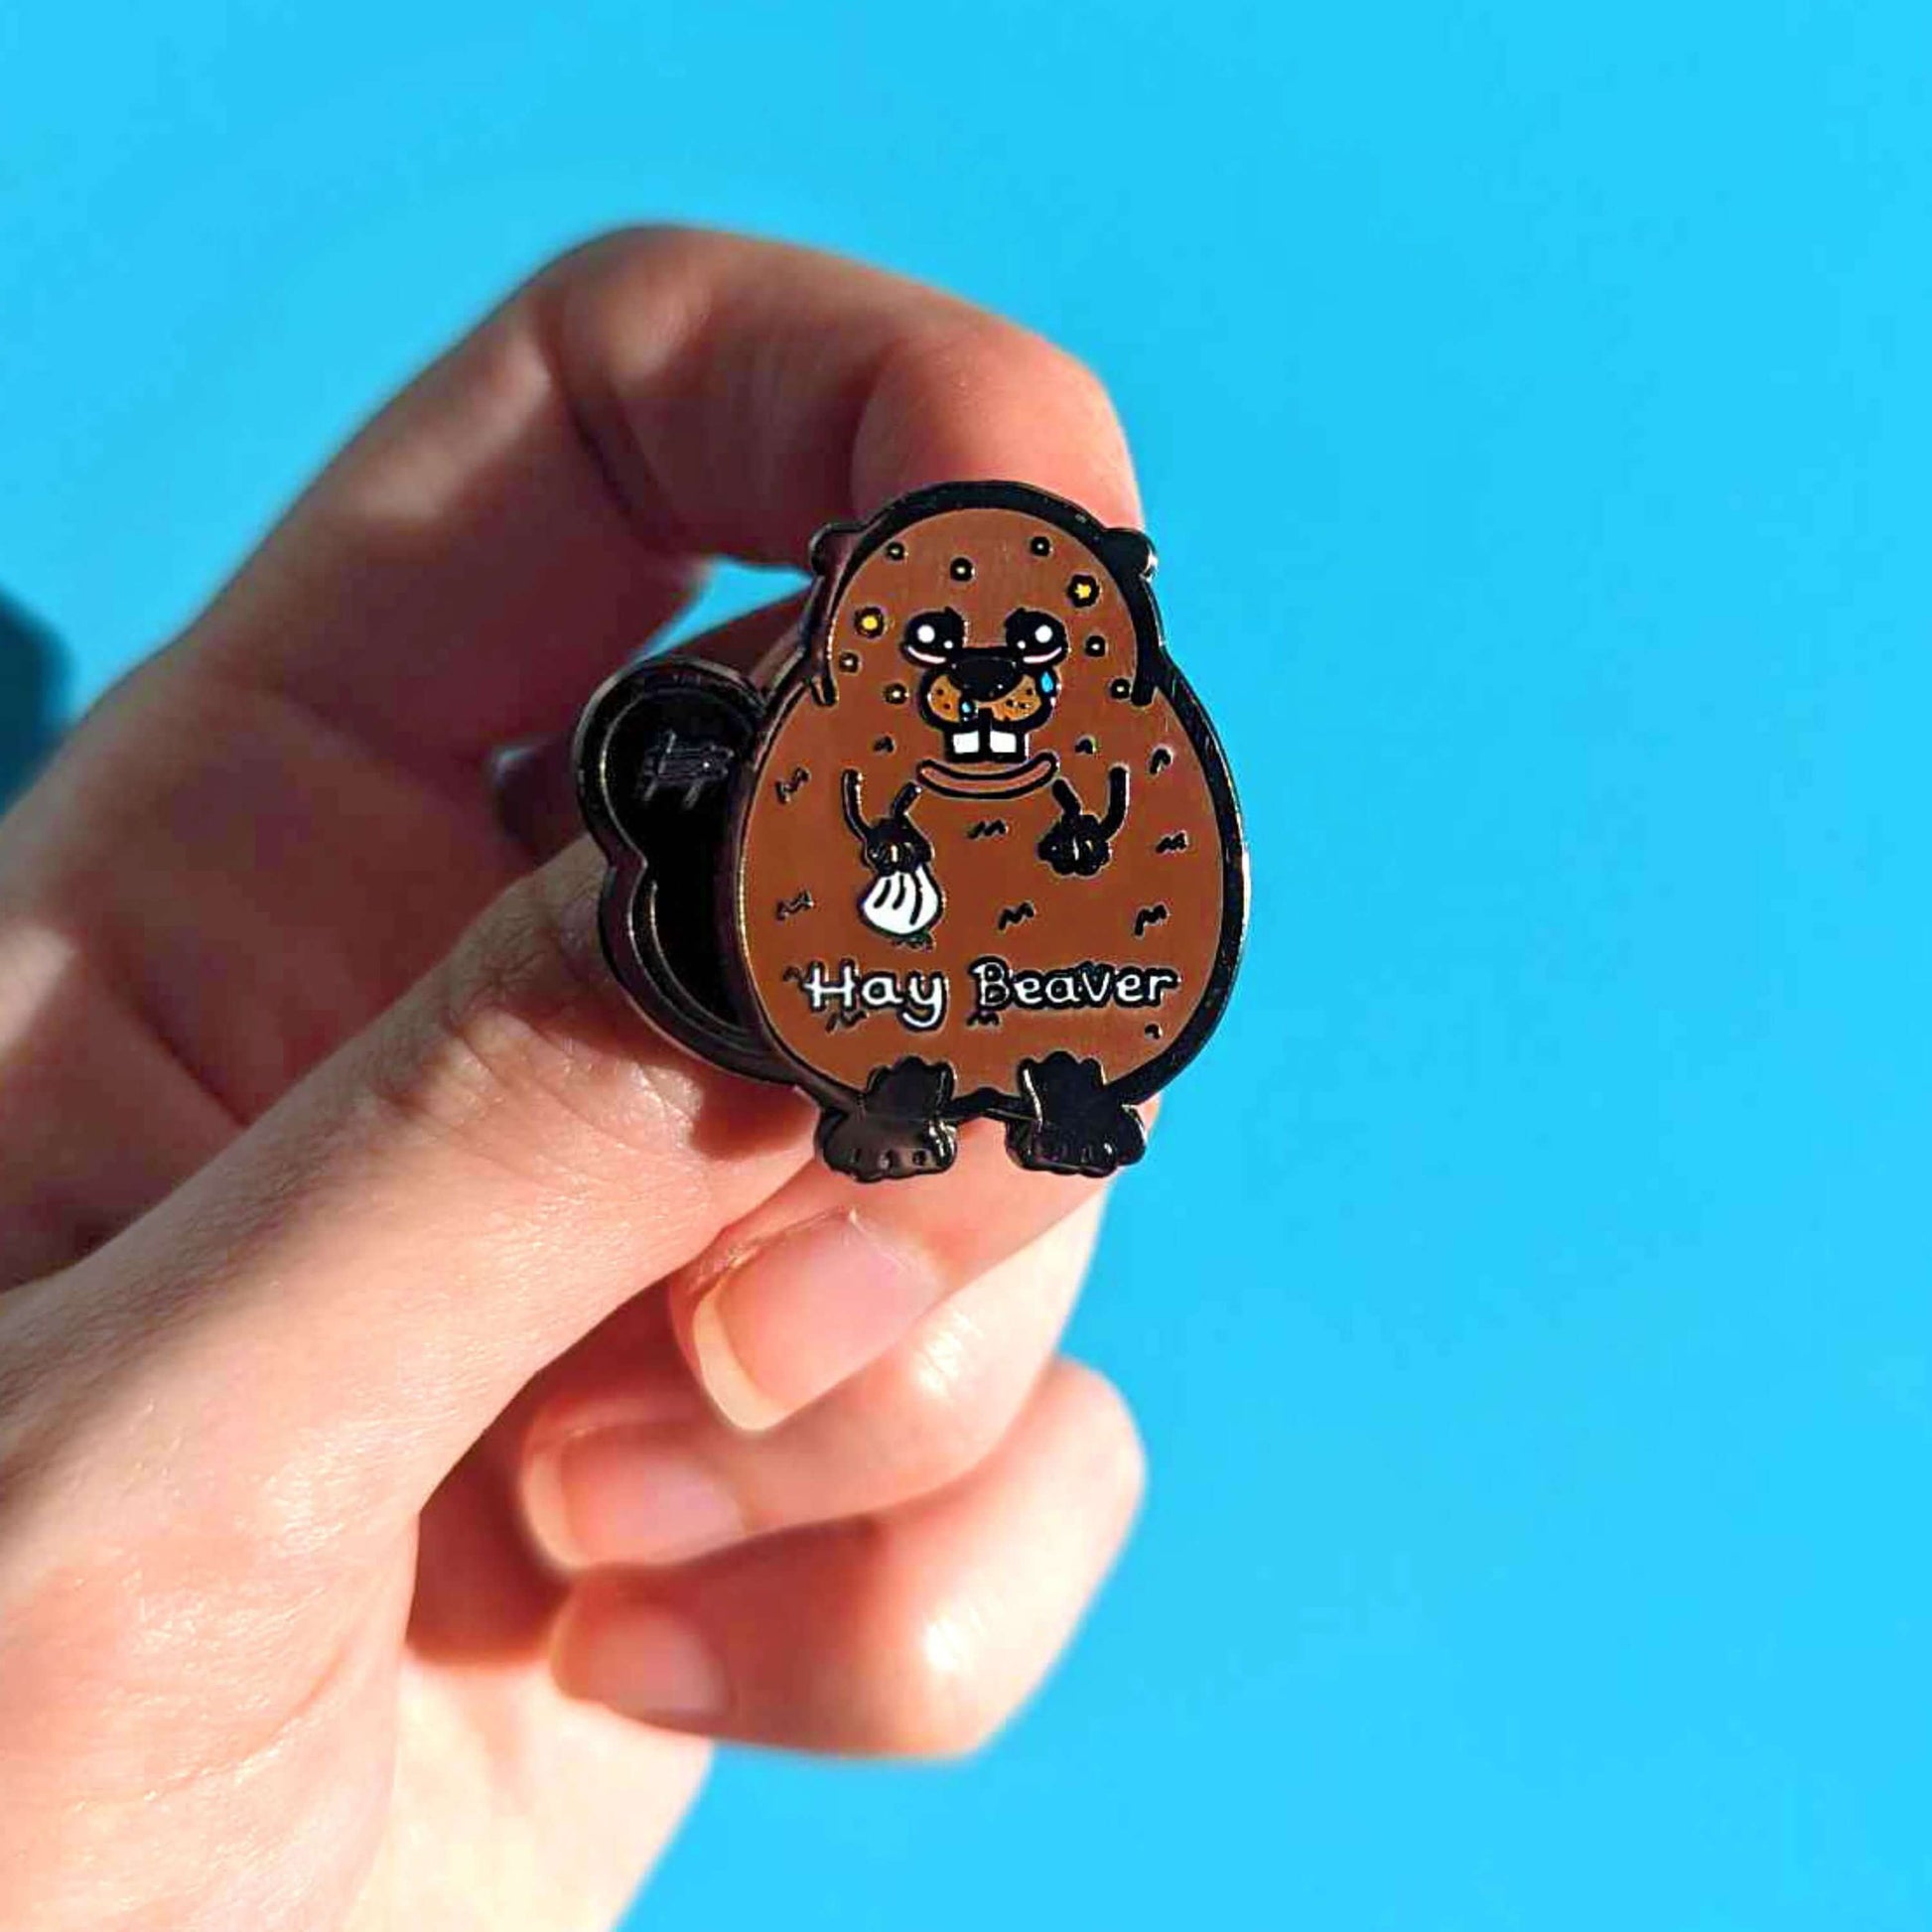 Hay Beaver Enamel Pin - Hay Fever held in front of a blue background. The enamel pin is a brown beaver with watery eyes, dripping nose and yellow spots on face and is holding a tissue with it's little hand. Hay beaver is written across its belly. The enamel pin is designed to raise awareness for hay fever or allergic rhinitis